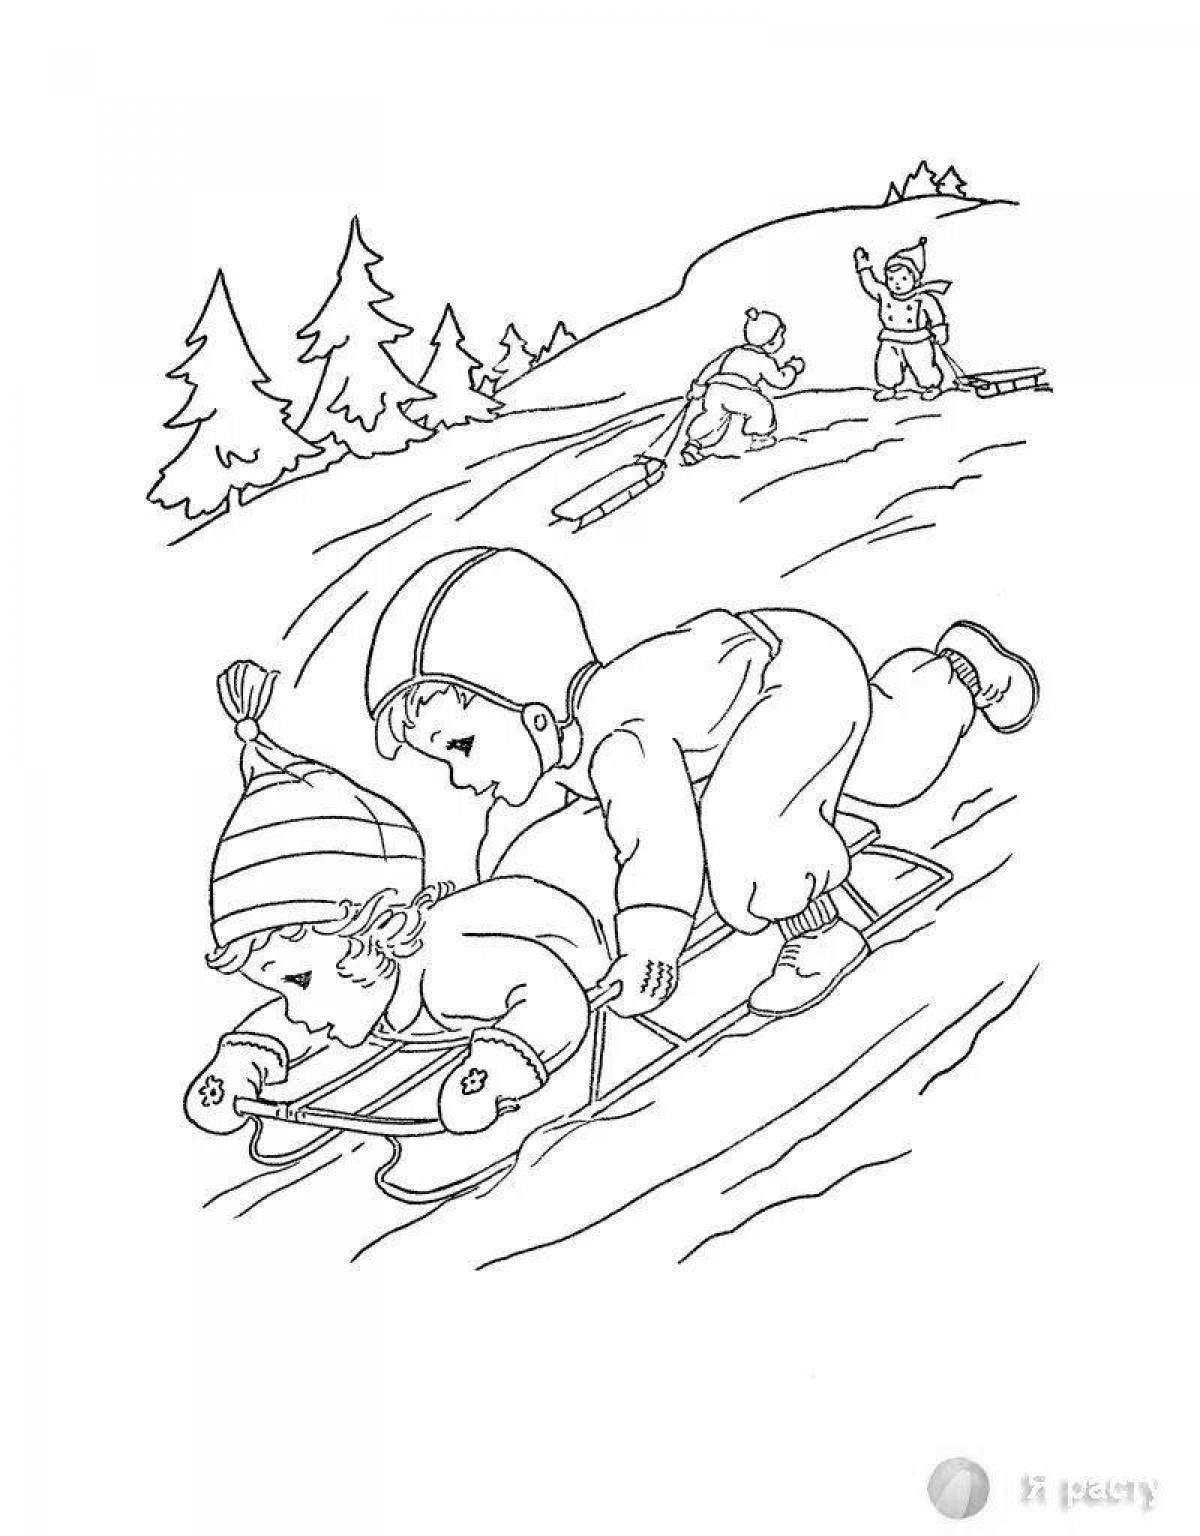 Winter safety fun coloring book for preschoolers